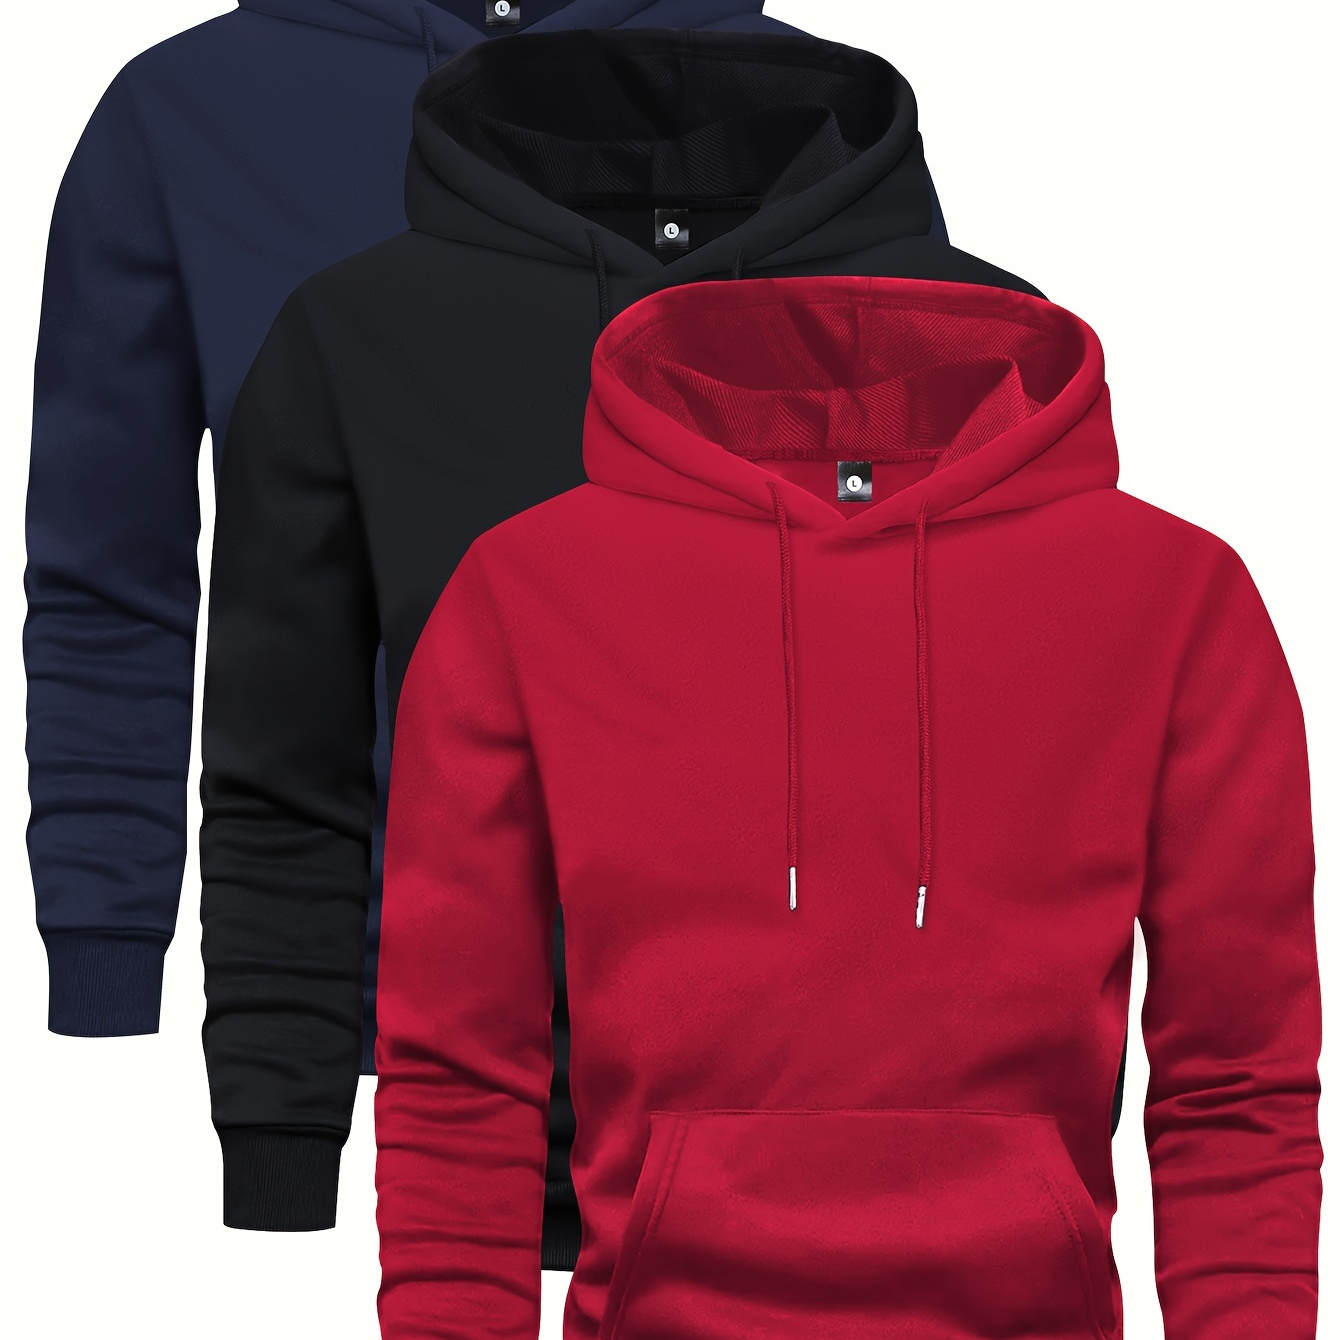 

3-pack Set Of Solid Color Men's Hooded Long Sleeve Sweatshirts With Kangaroo Pocket, Chic And Trendy Tops For Men, Versatile For Autumn And Winter Outdoors And Sports Wear